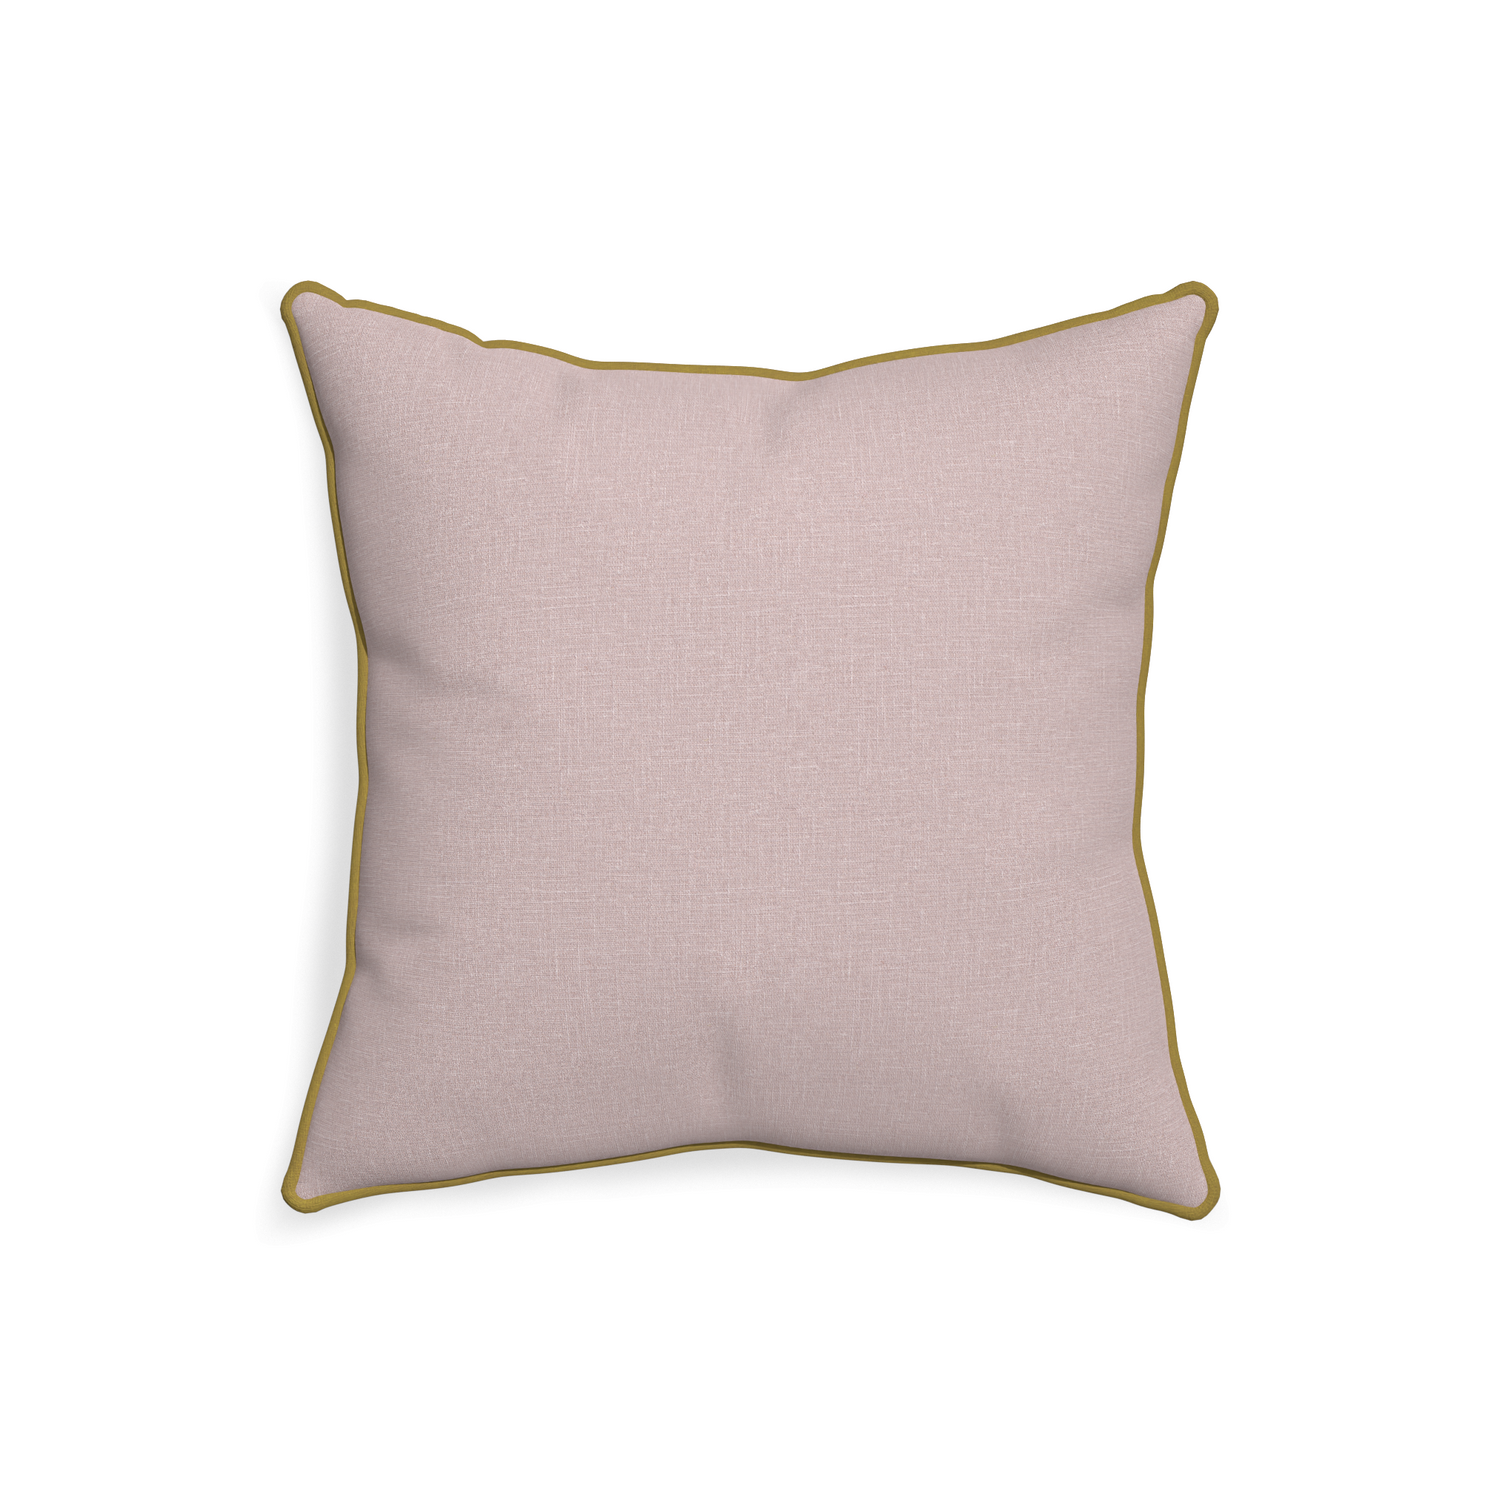 20-square orchid custom mauve pinkpillow with c piping on white background